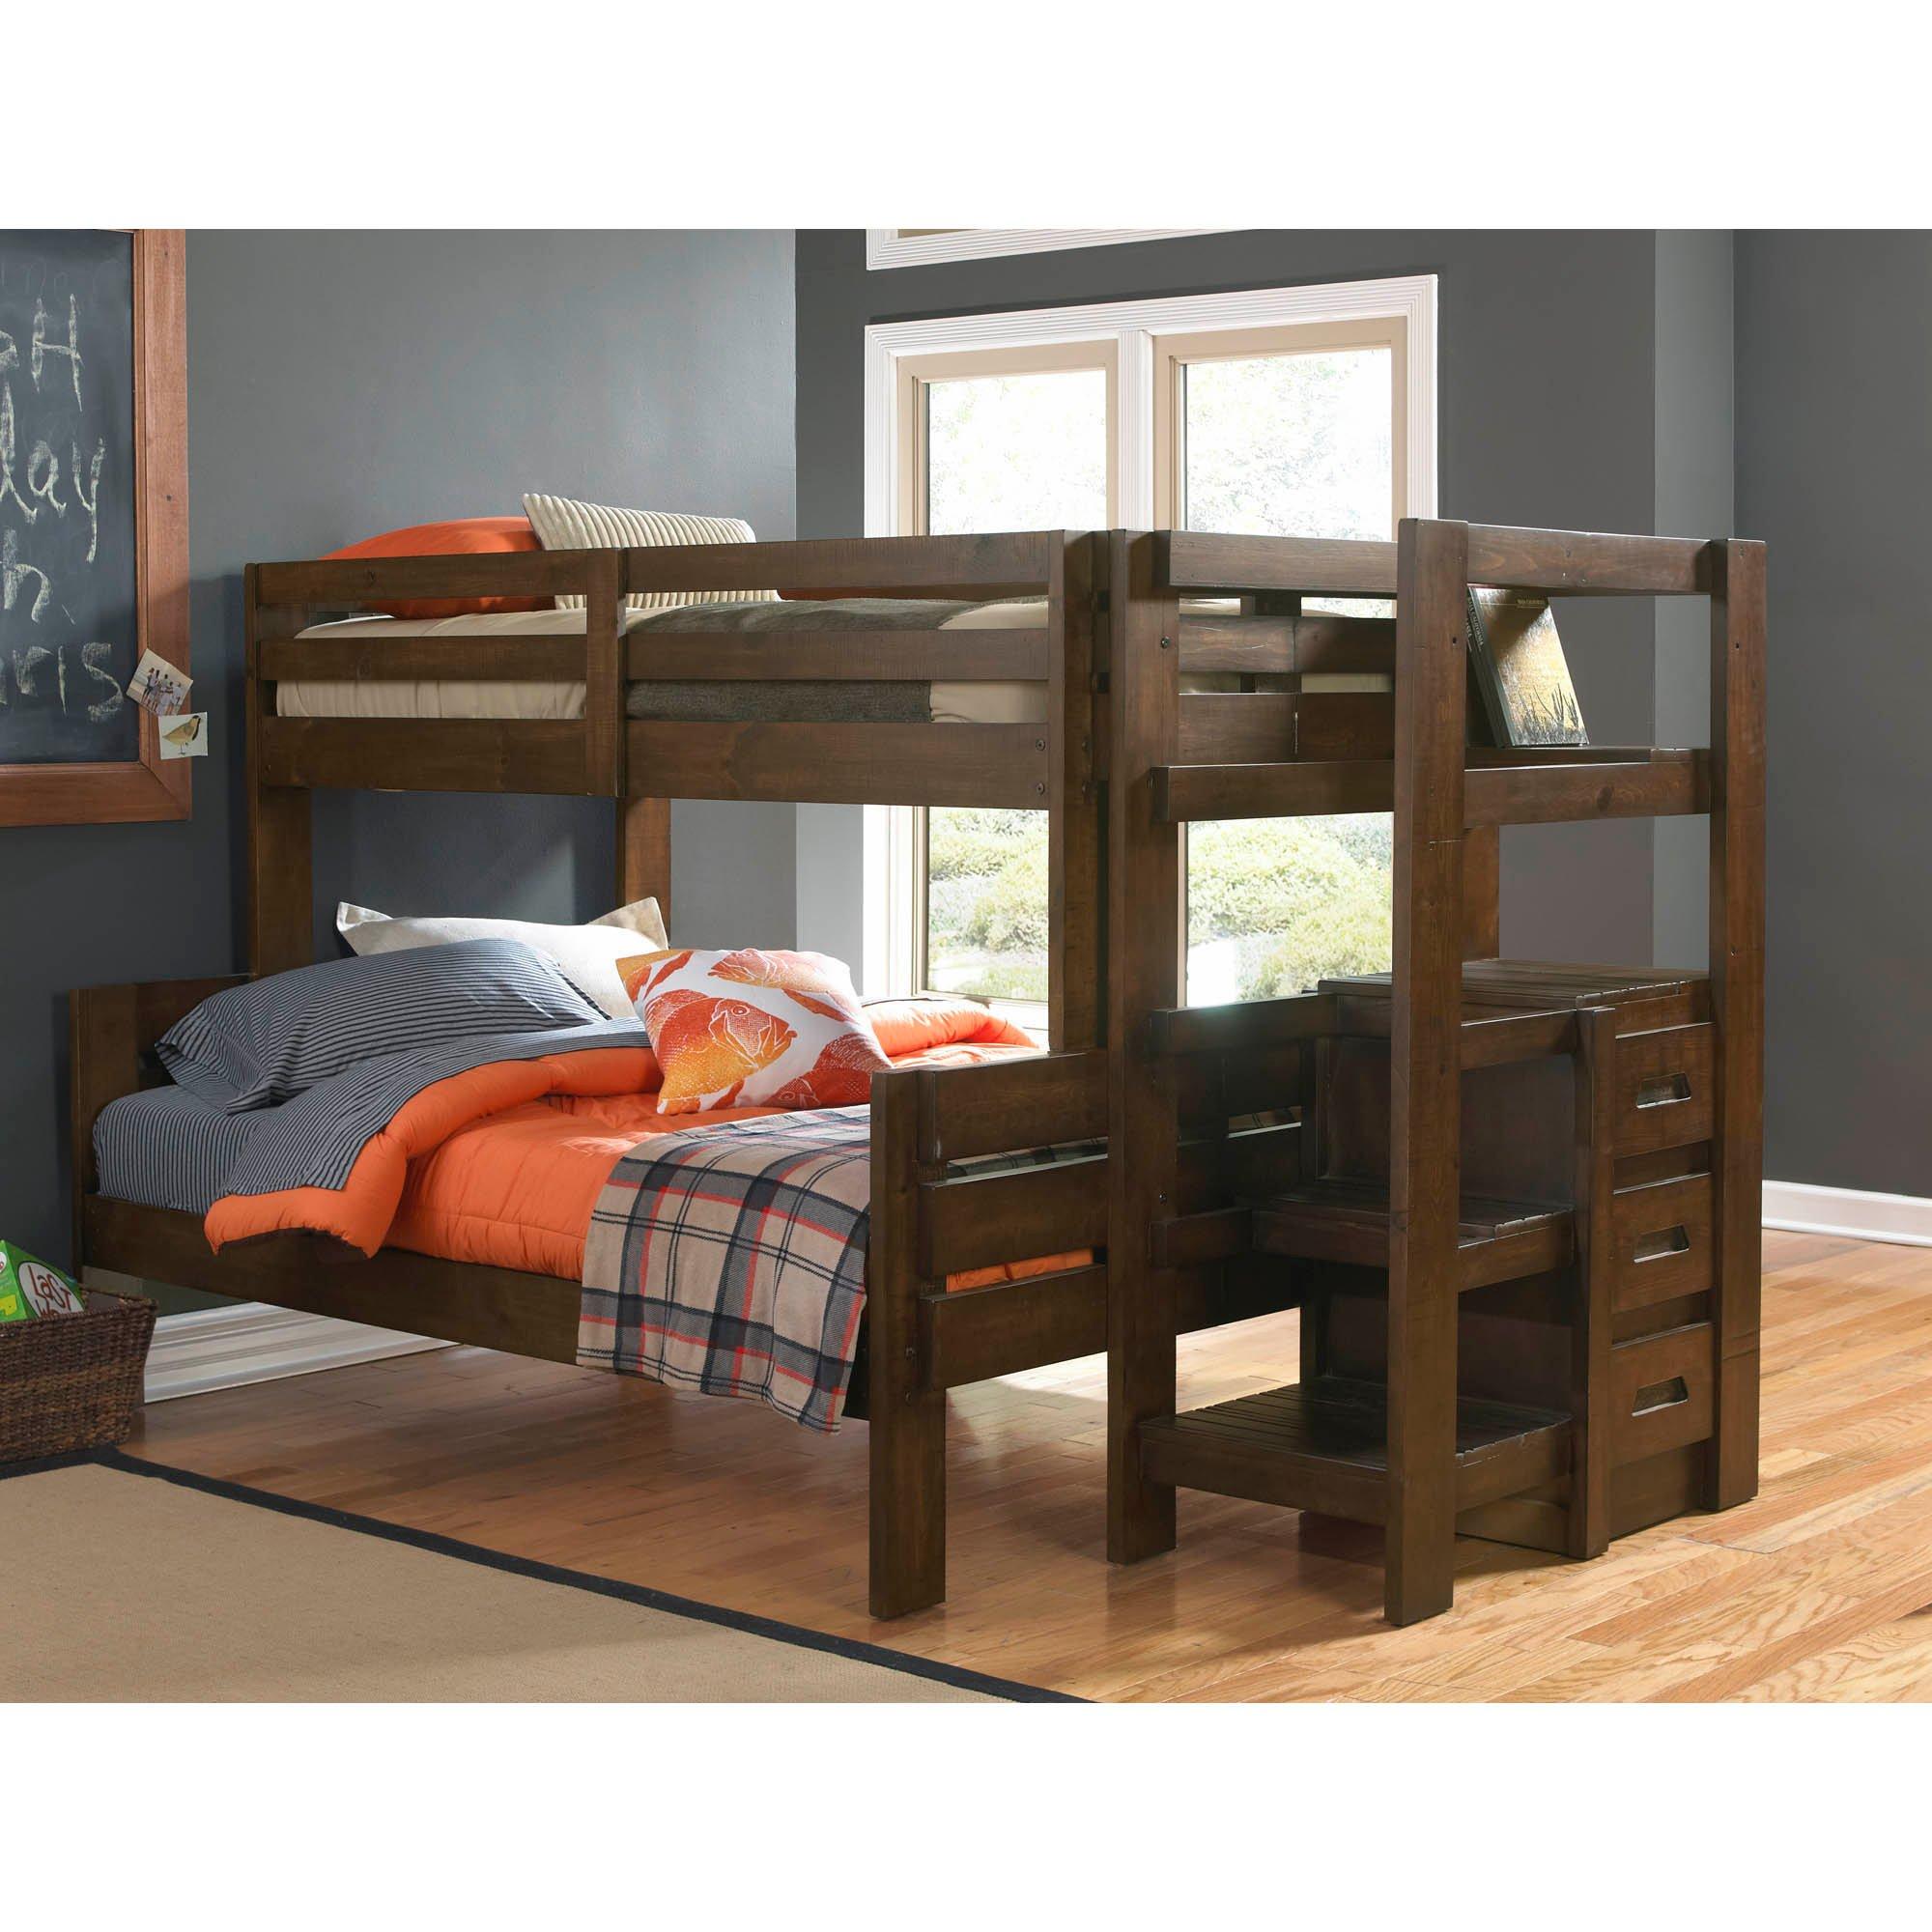 7 Piece Twin Full Storage Bunk Bed, Bunk Beds No Credit Check